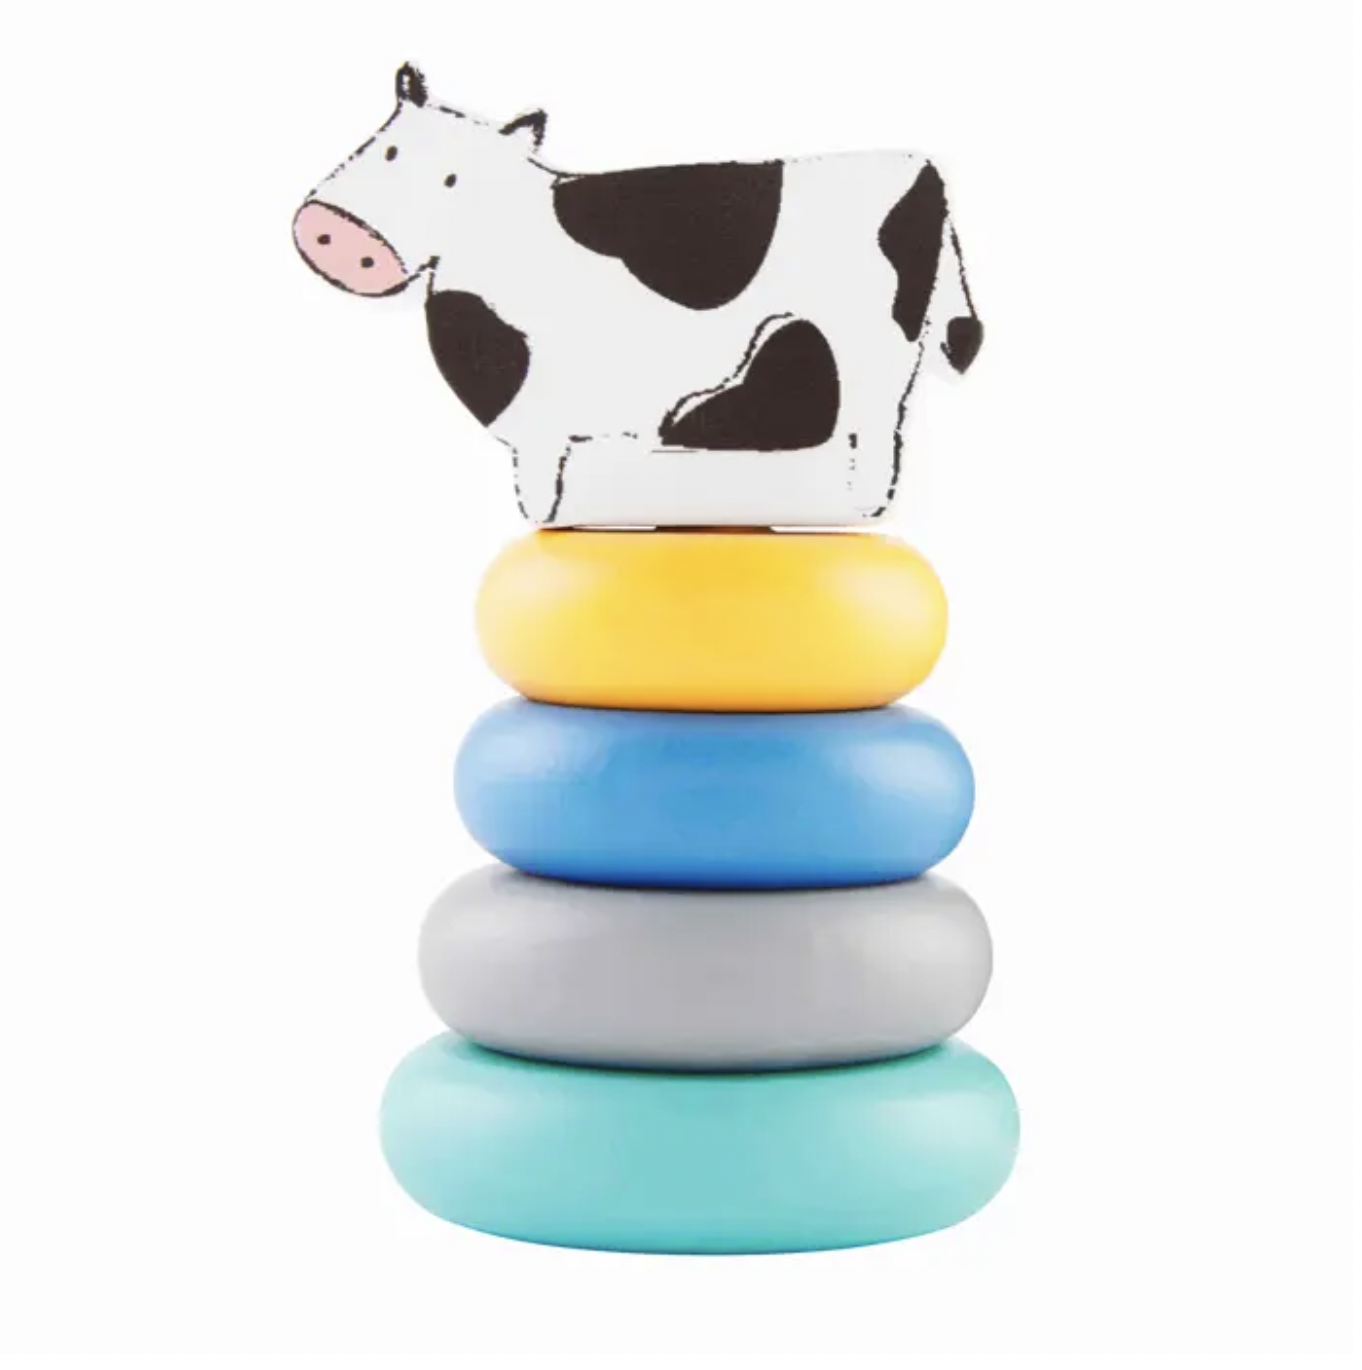 Cow Farm Wood Stacking Toy